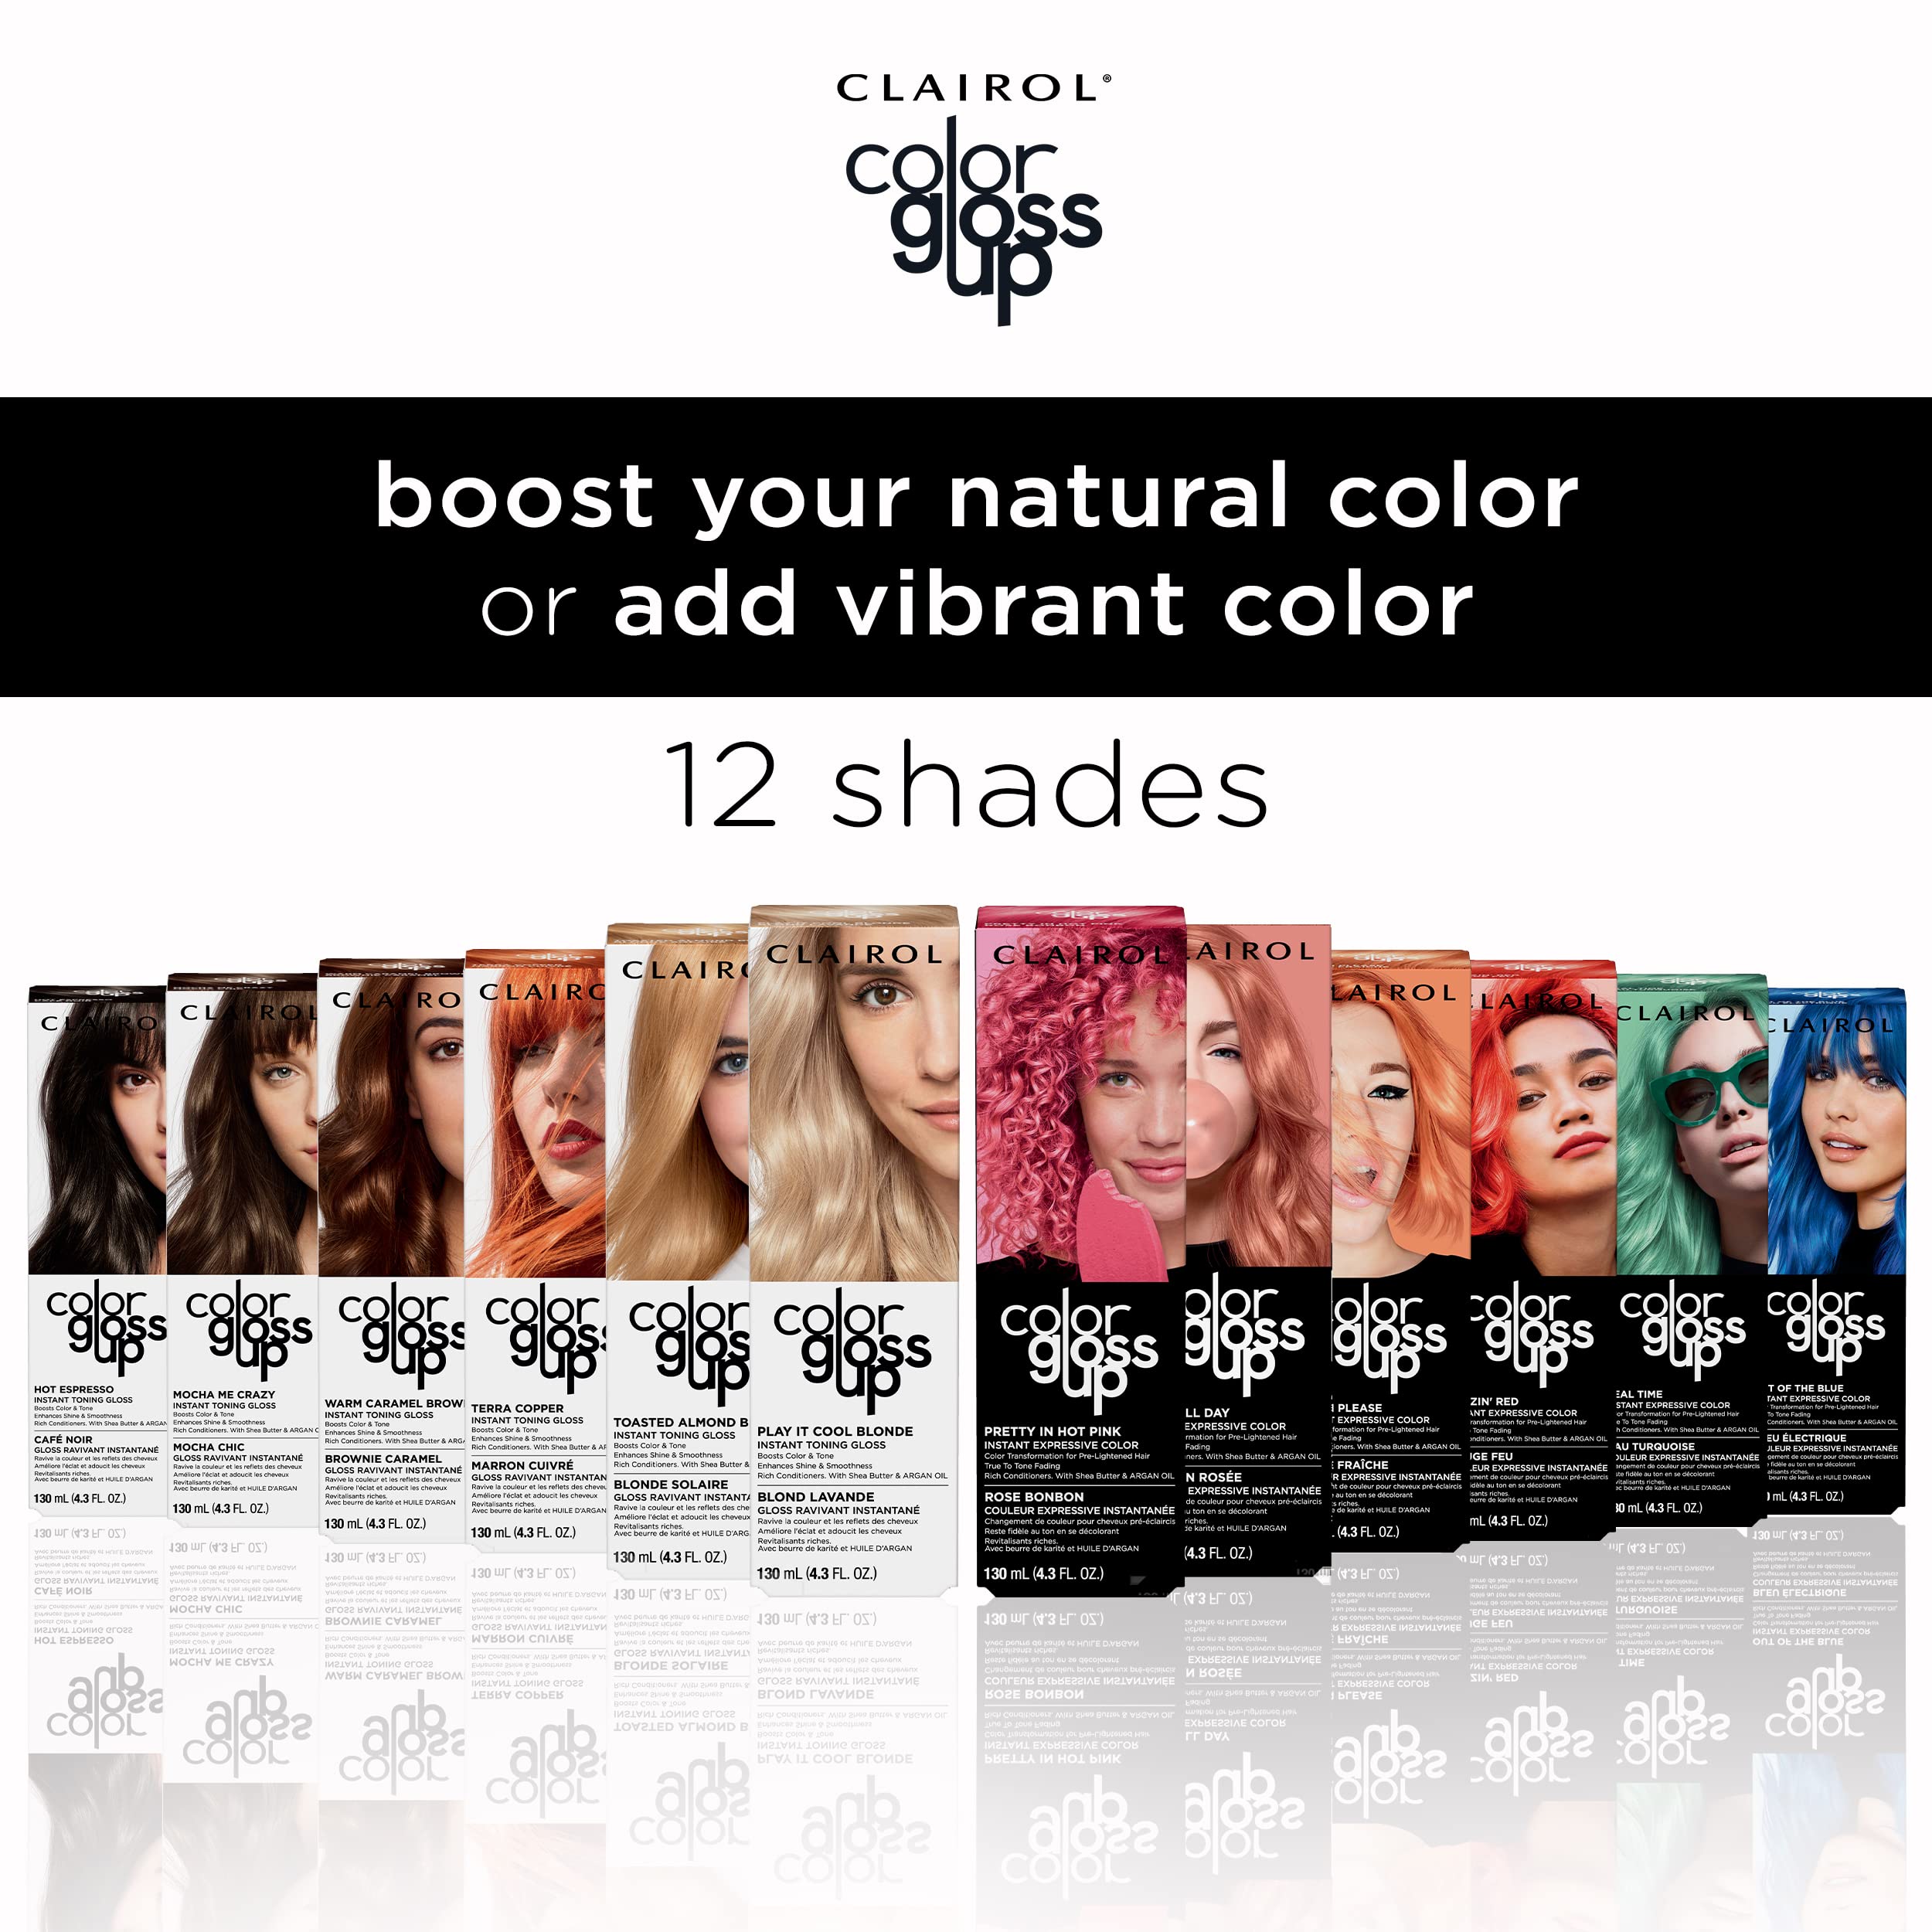 Clairol Color Gloss Up Temporary Hair Dye, Blazing Red Hair Color, Pack of 1